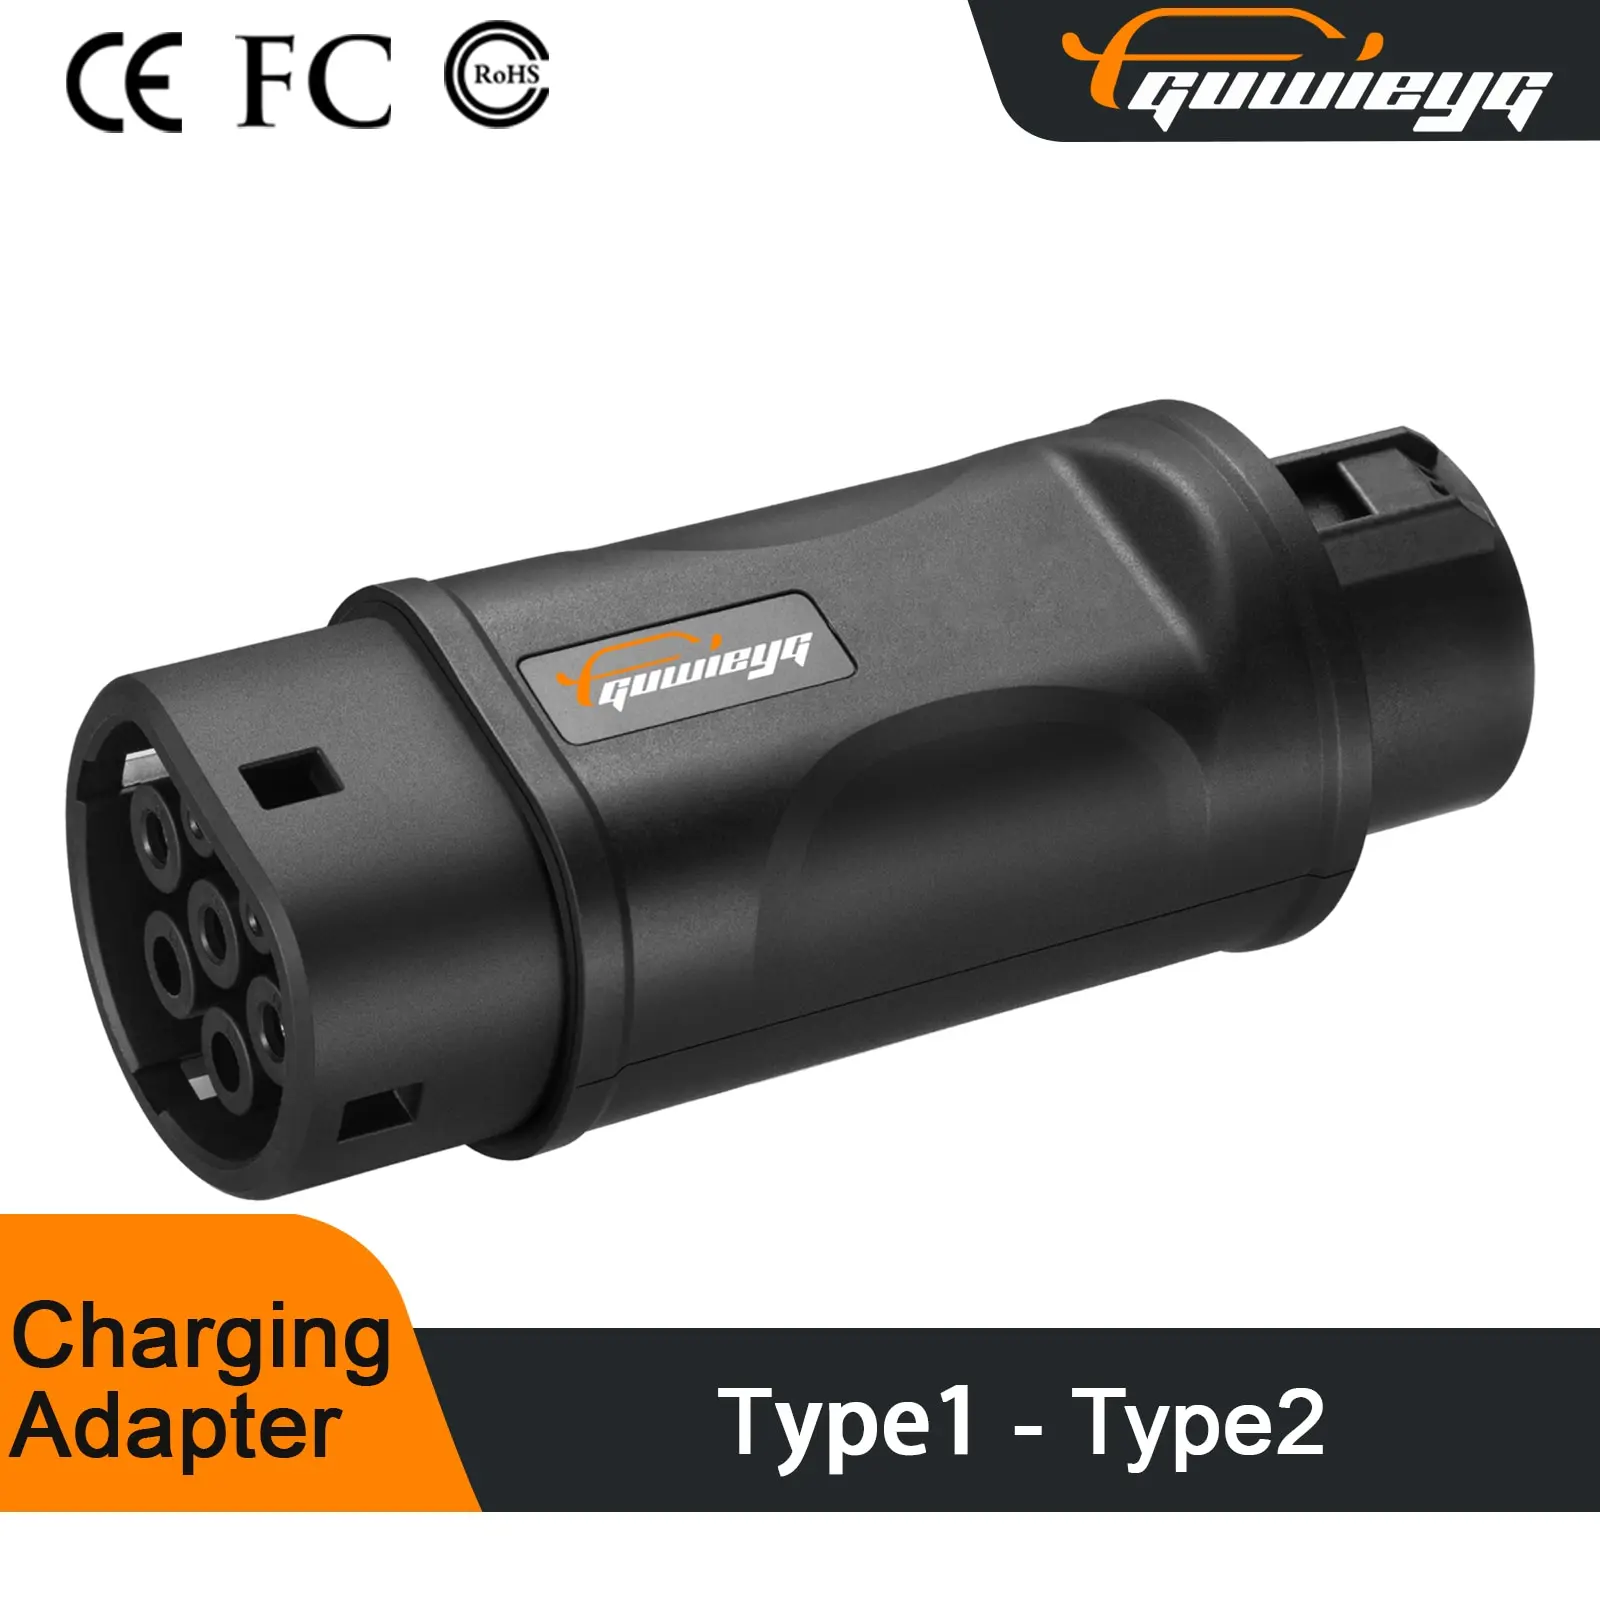 GUWIEYG EV Charger Adapter J1772 to IEC62196 Adapter Type1 to Type2 EV Adapter 32A 1Phase 7.2kw Max EV Charger Converter